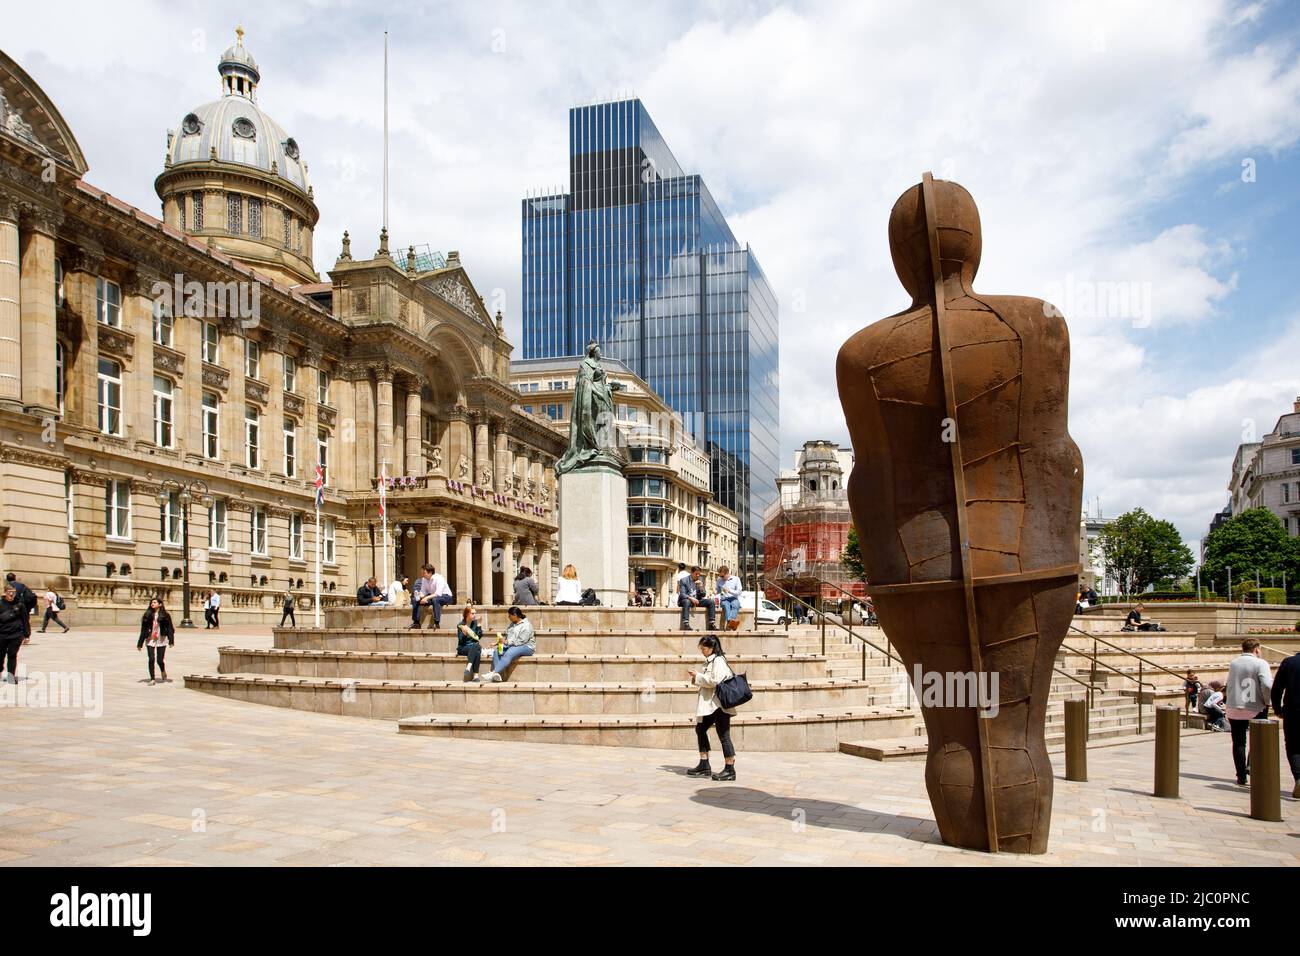 Victoria Sqaure, Birmingham. The centre of the City. The picture shows the Council House to the left, Birmingham's tallest building, 103 Colmore Row, centre and the iron man statue by Anthony Gormley. Stock Photo